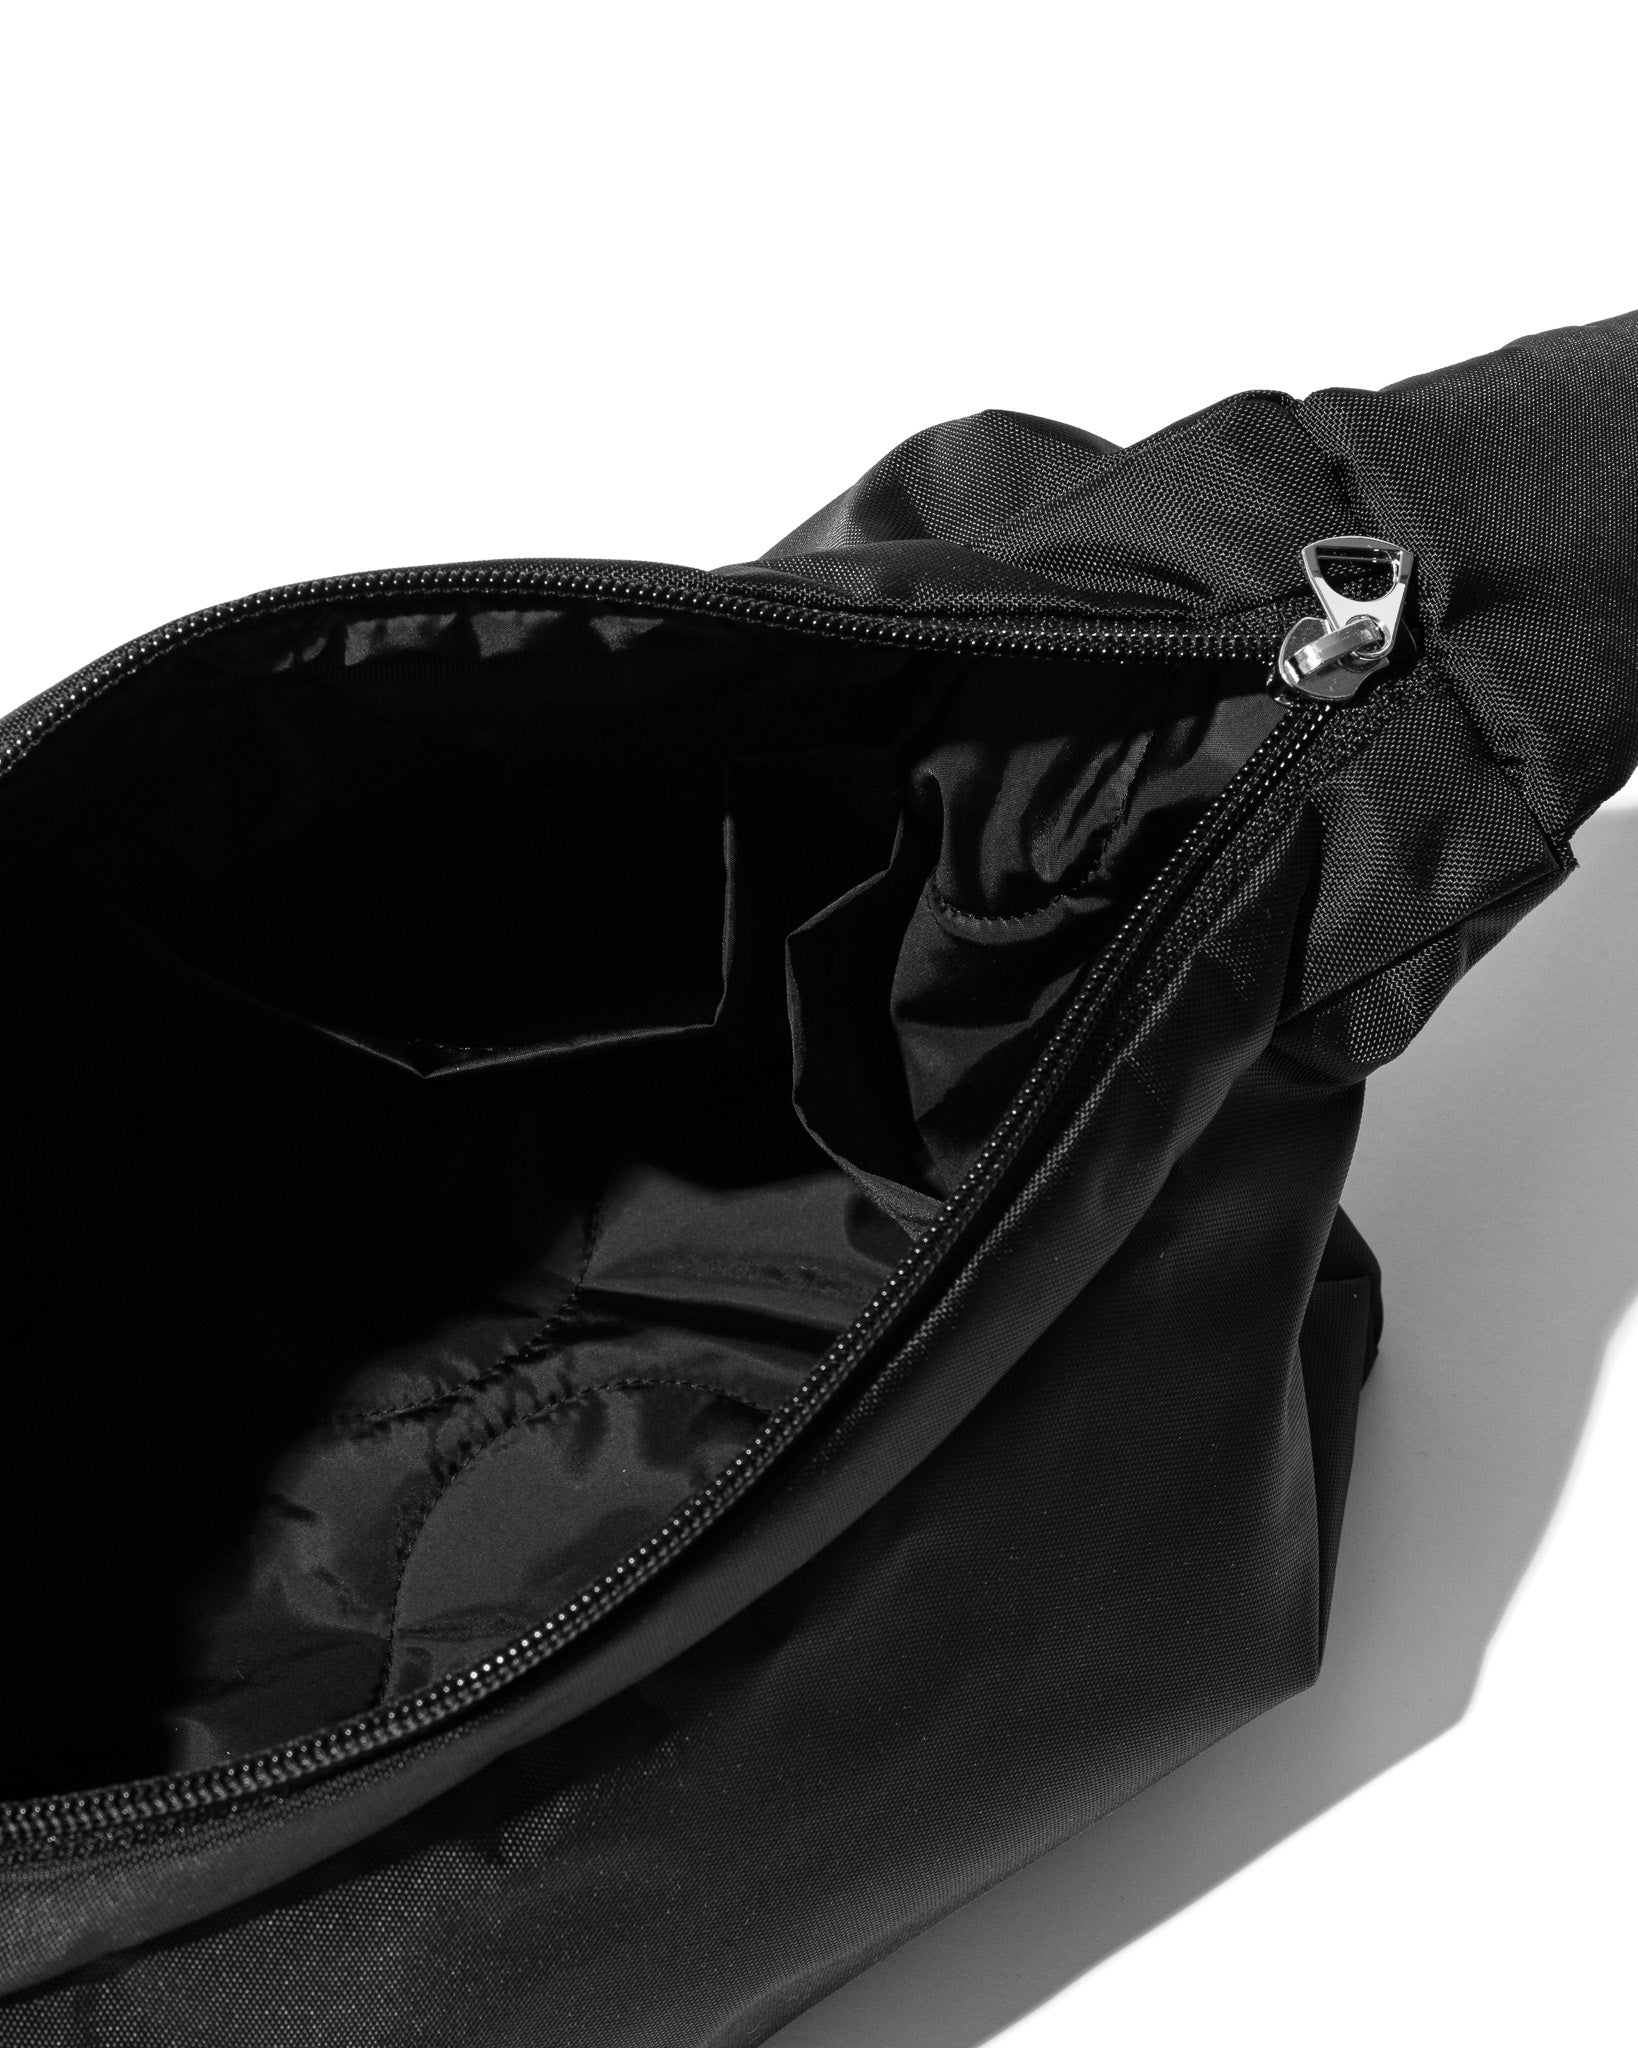 【6.26 WED 20:00- IN STOCK】HOLIDAY BAG.